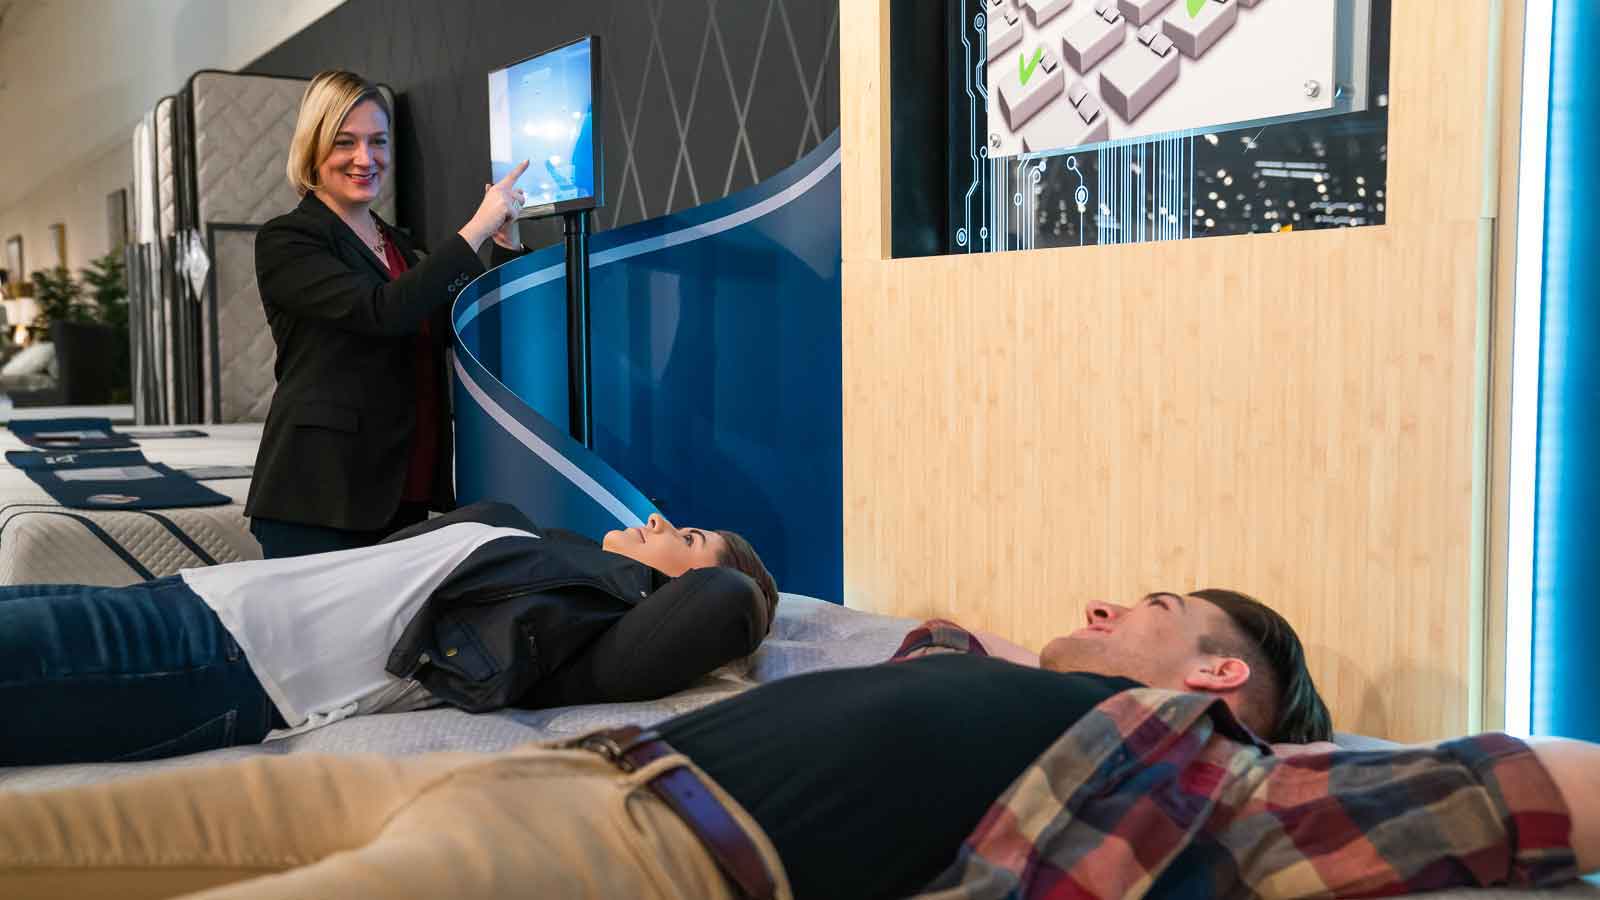 Why Should You Buy A Mattress From The Sleep Center At Furniture Fair?